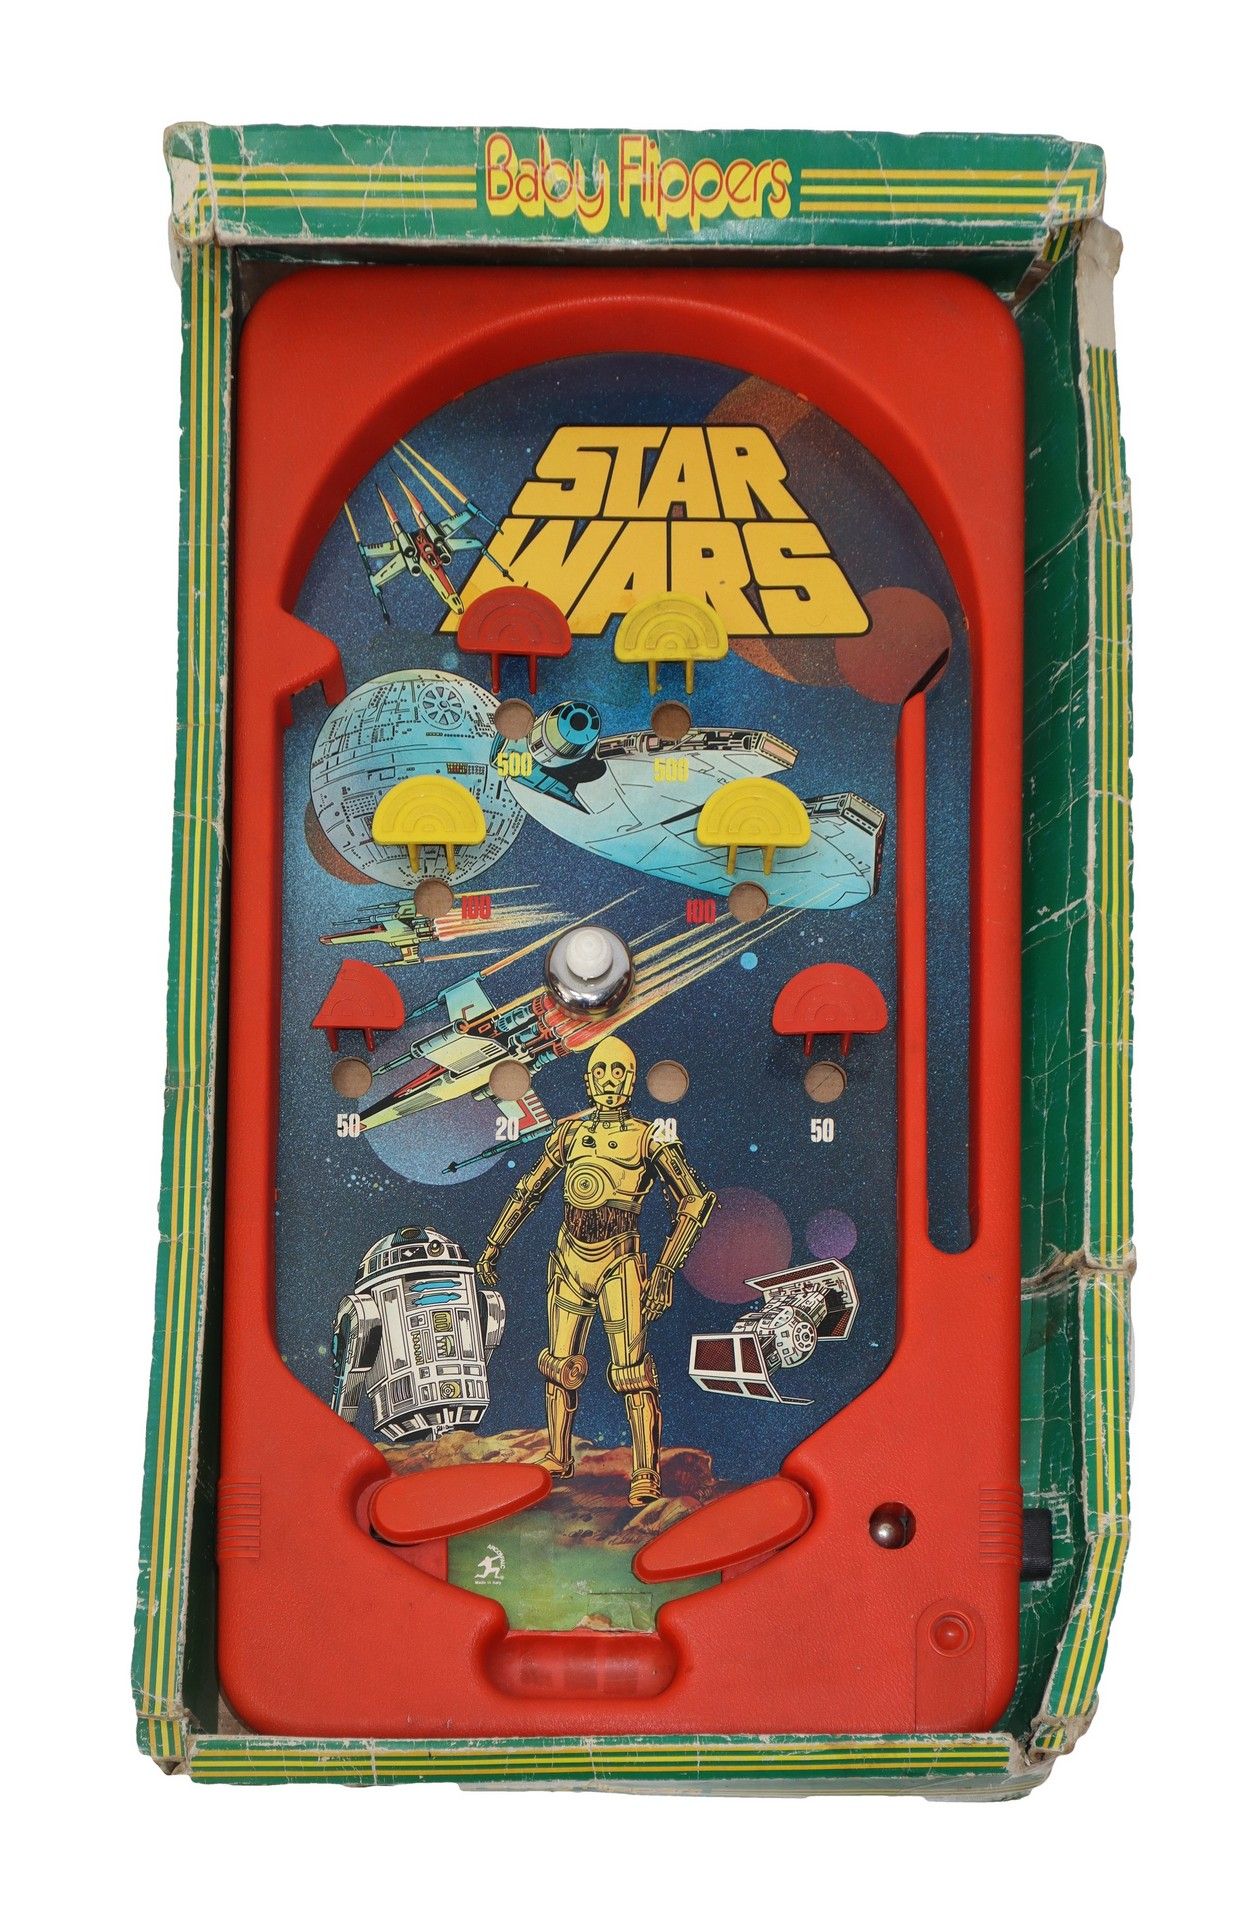 Arco Falc Star Wars table pinball. From the Star Wars film saga. Complete and wo&hellip;